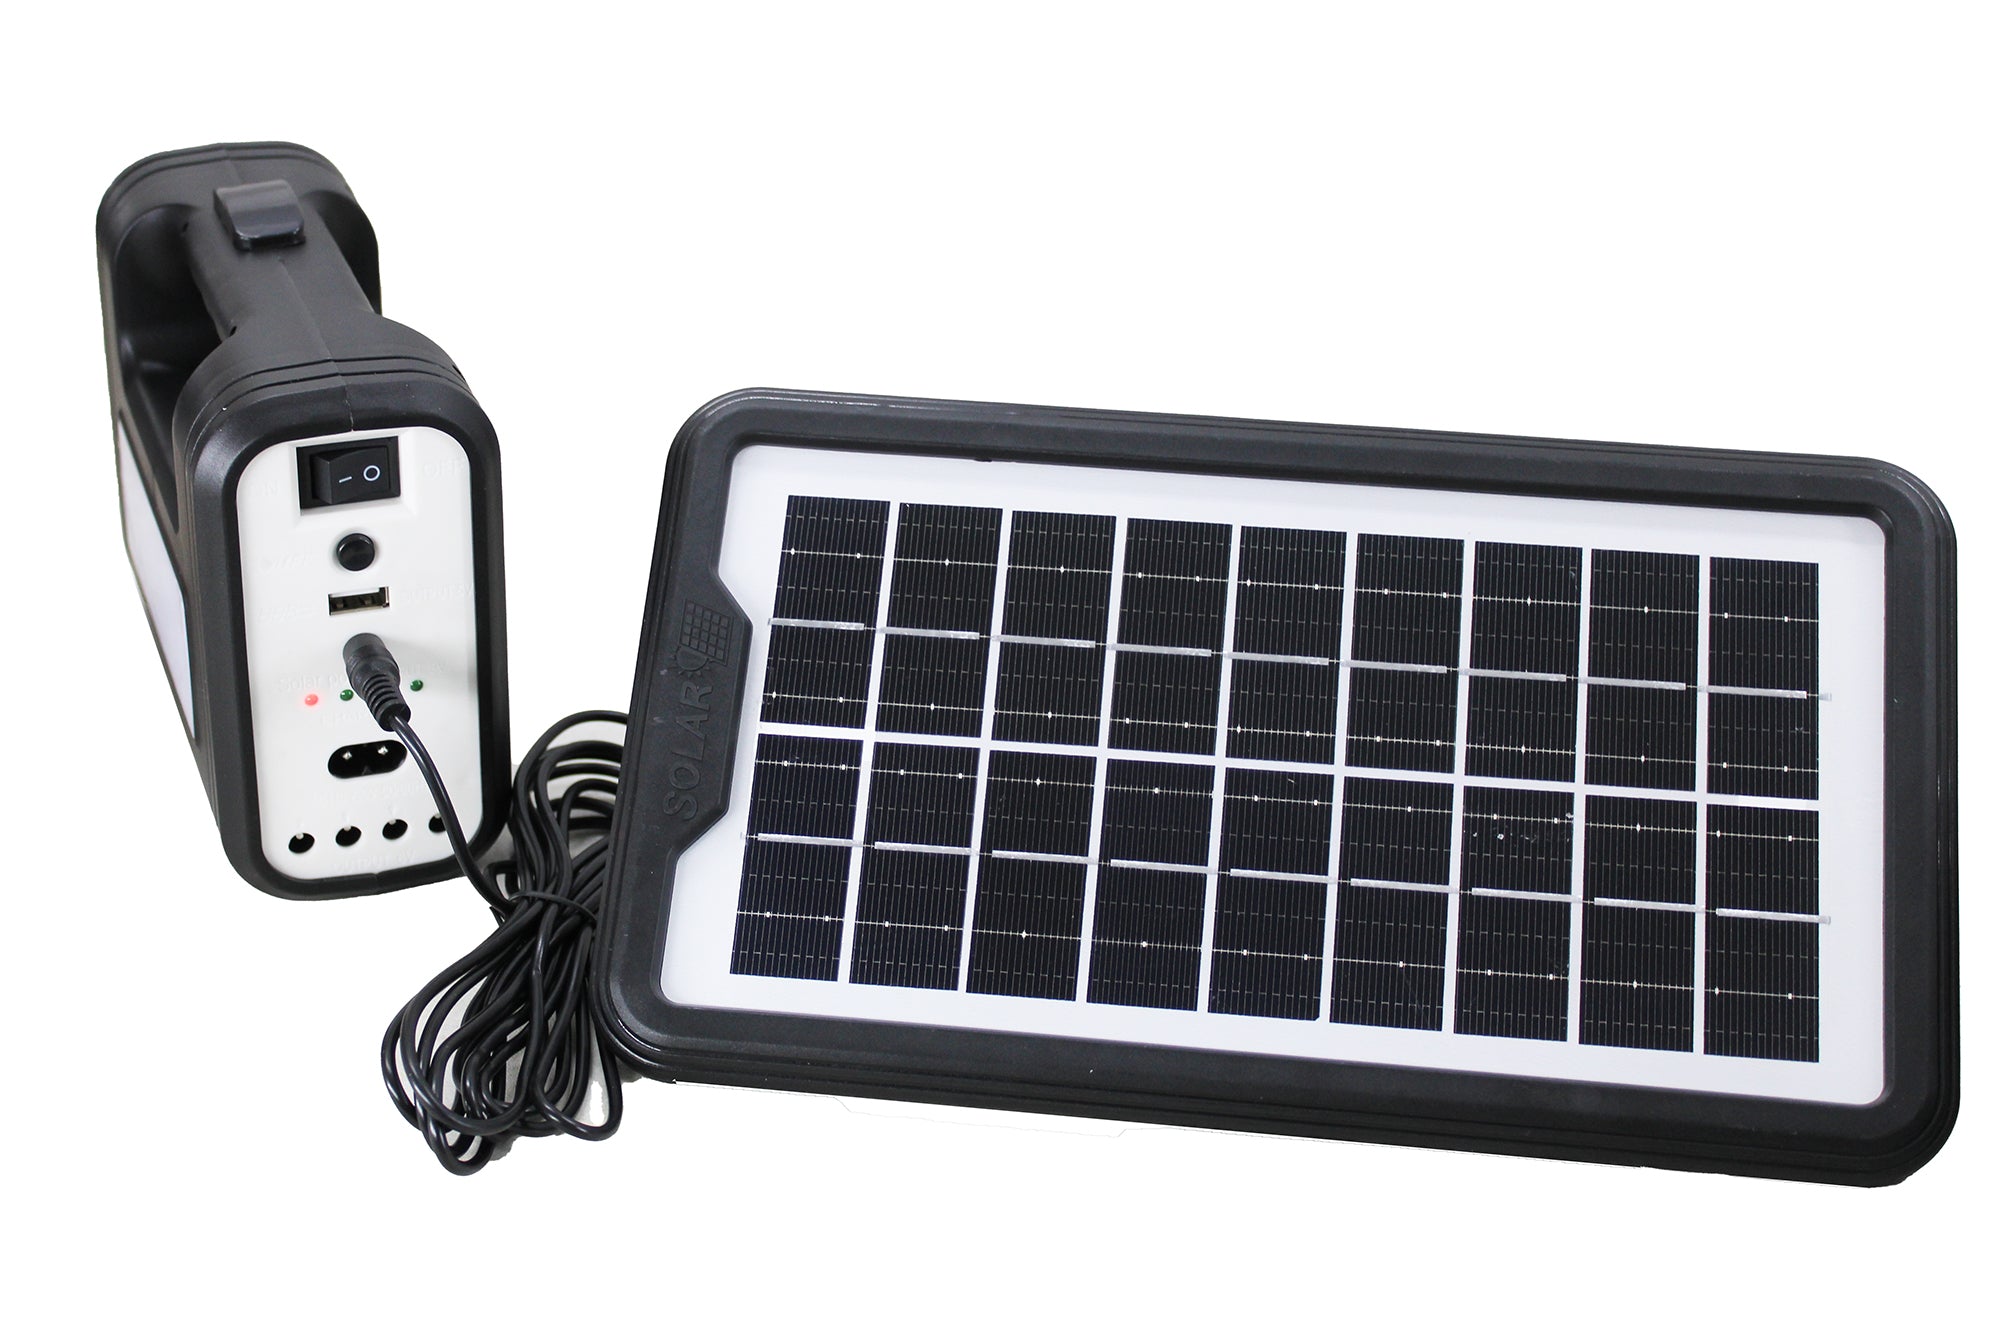 Digital Solar Lighting System With 9V Solar Panel and AC DC Outlets